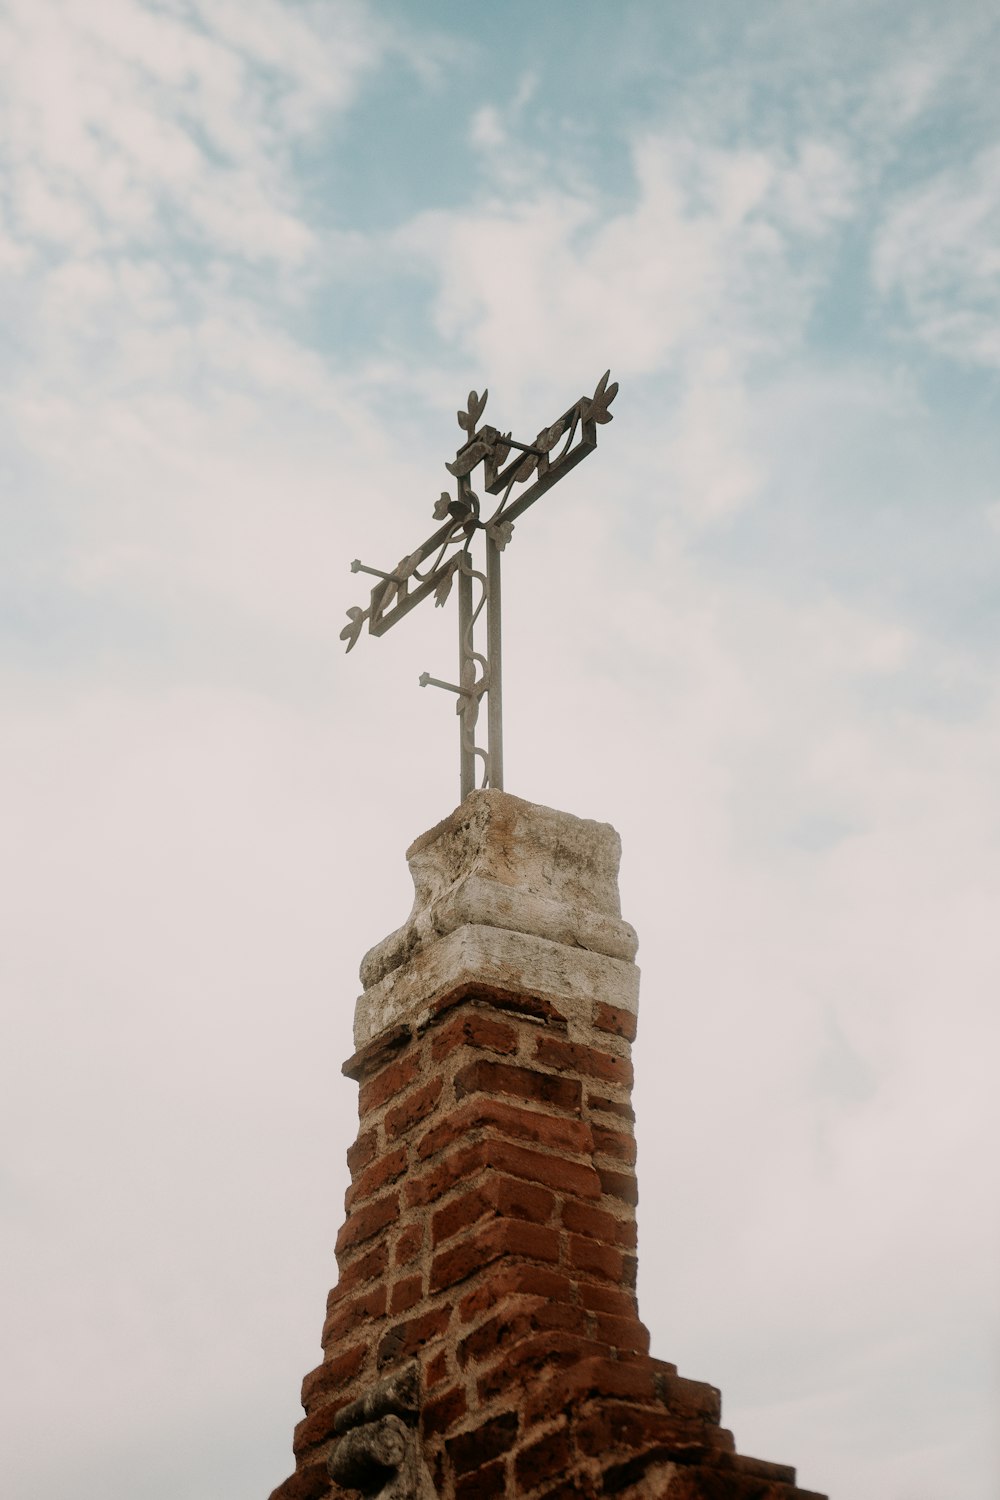 a weather vane on top of a brick building